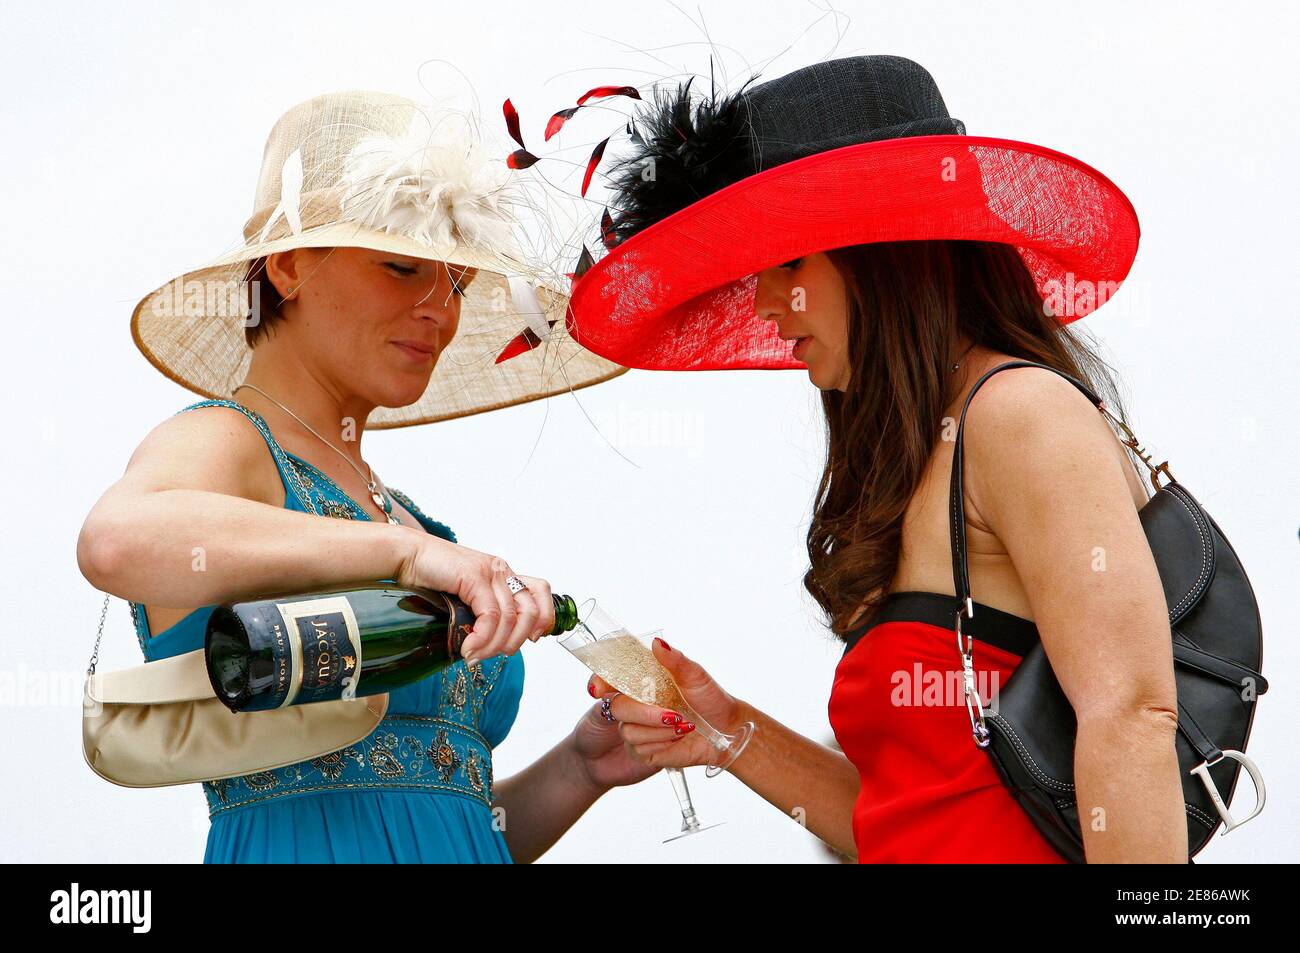 Racegoers drink champagne during Ladies day at the Epsom Derby Festival at Epsom Downs in Surrey, southern England June 6, 2008. REUTERS/Alessia Pierdomenico (BRITAIN) Stock Photo